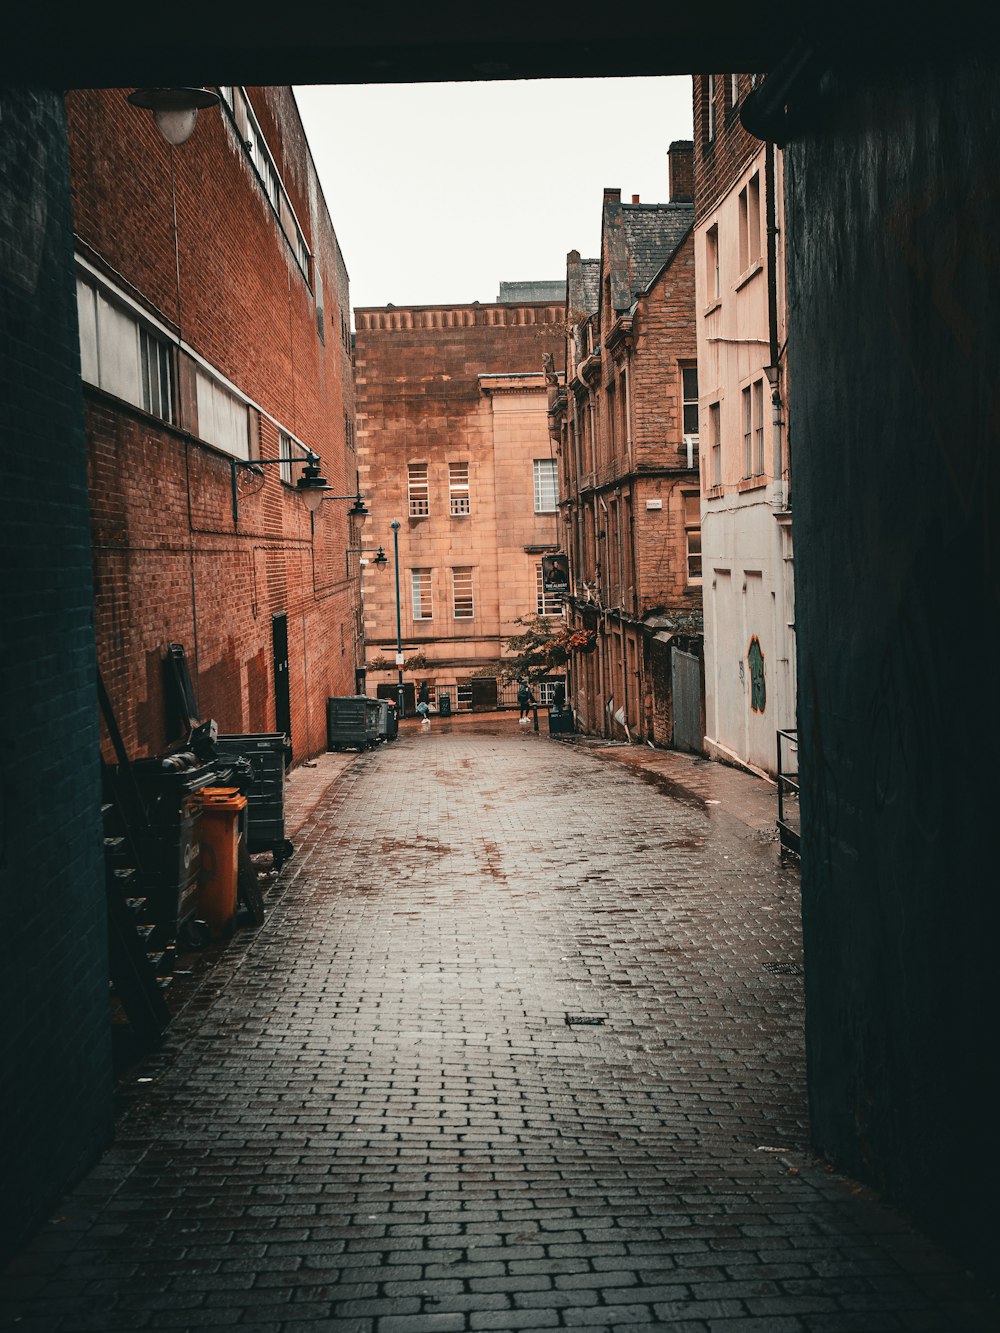 an alley way with a brick walkway between two buildings